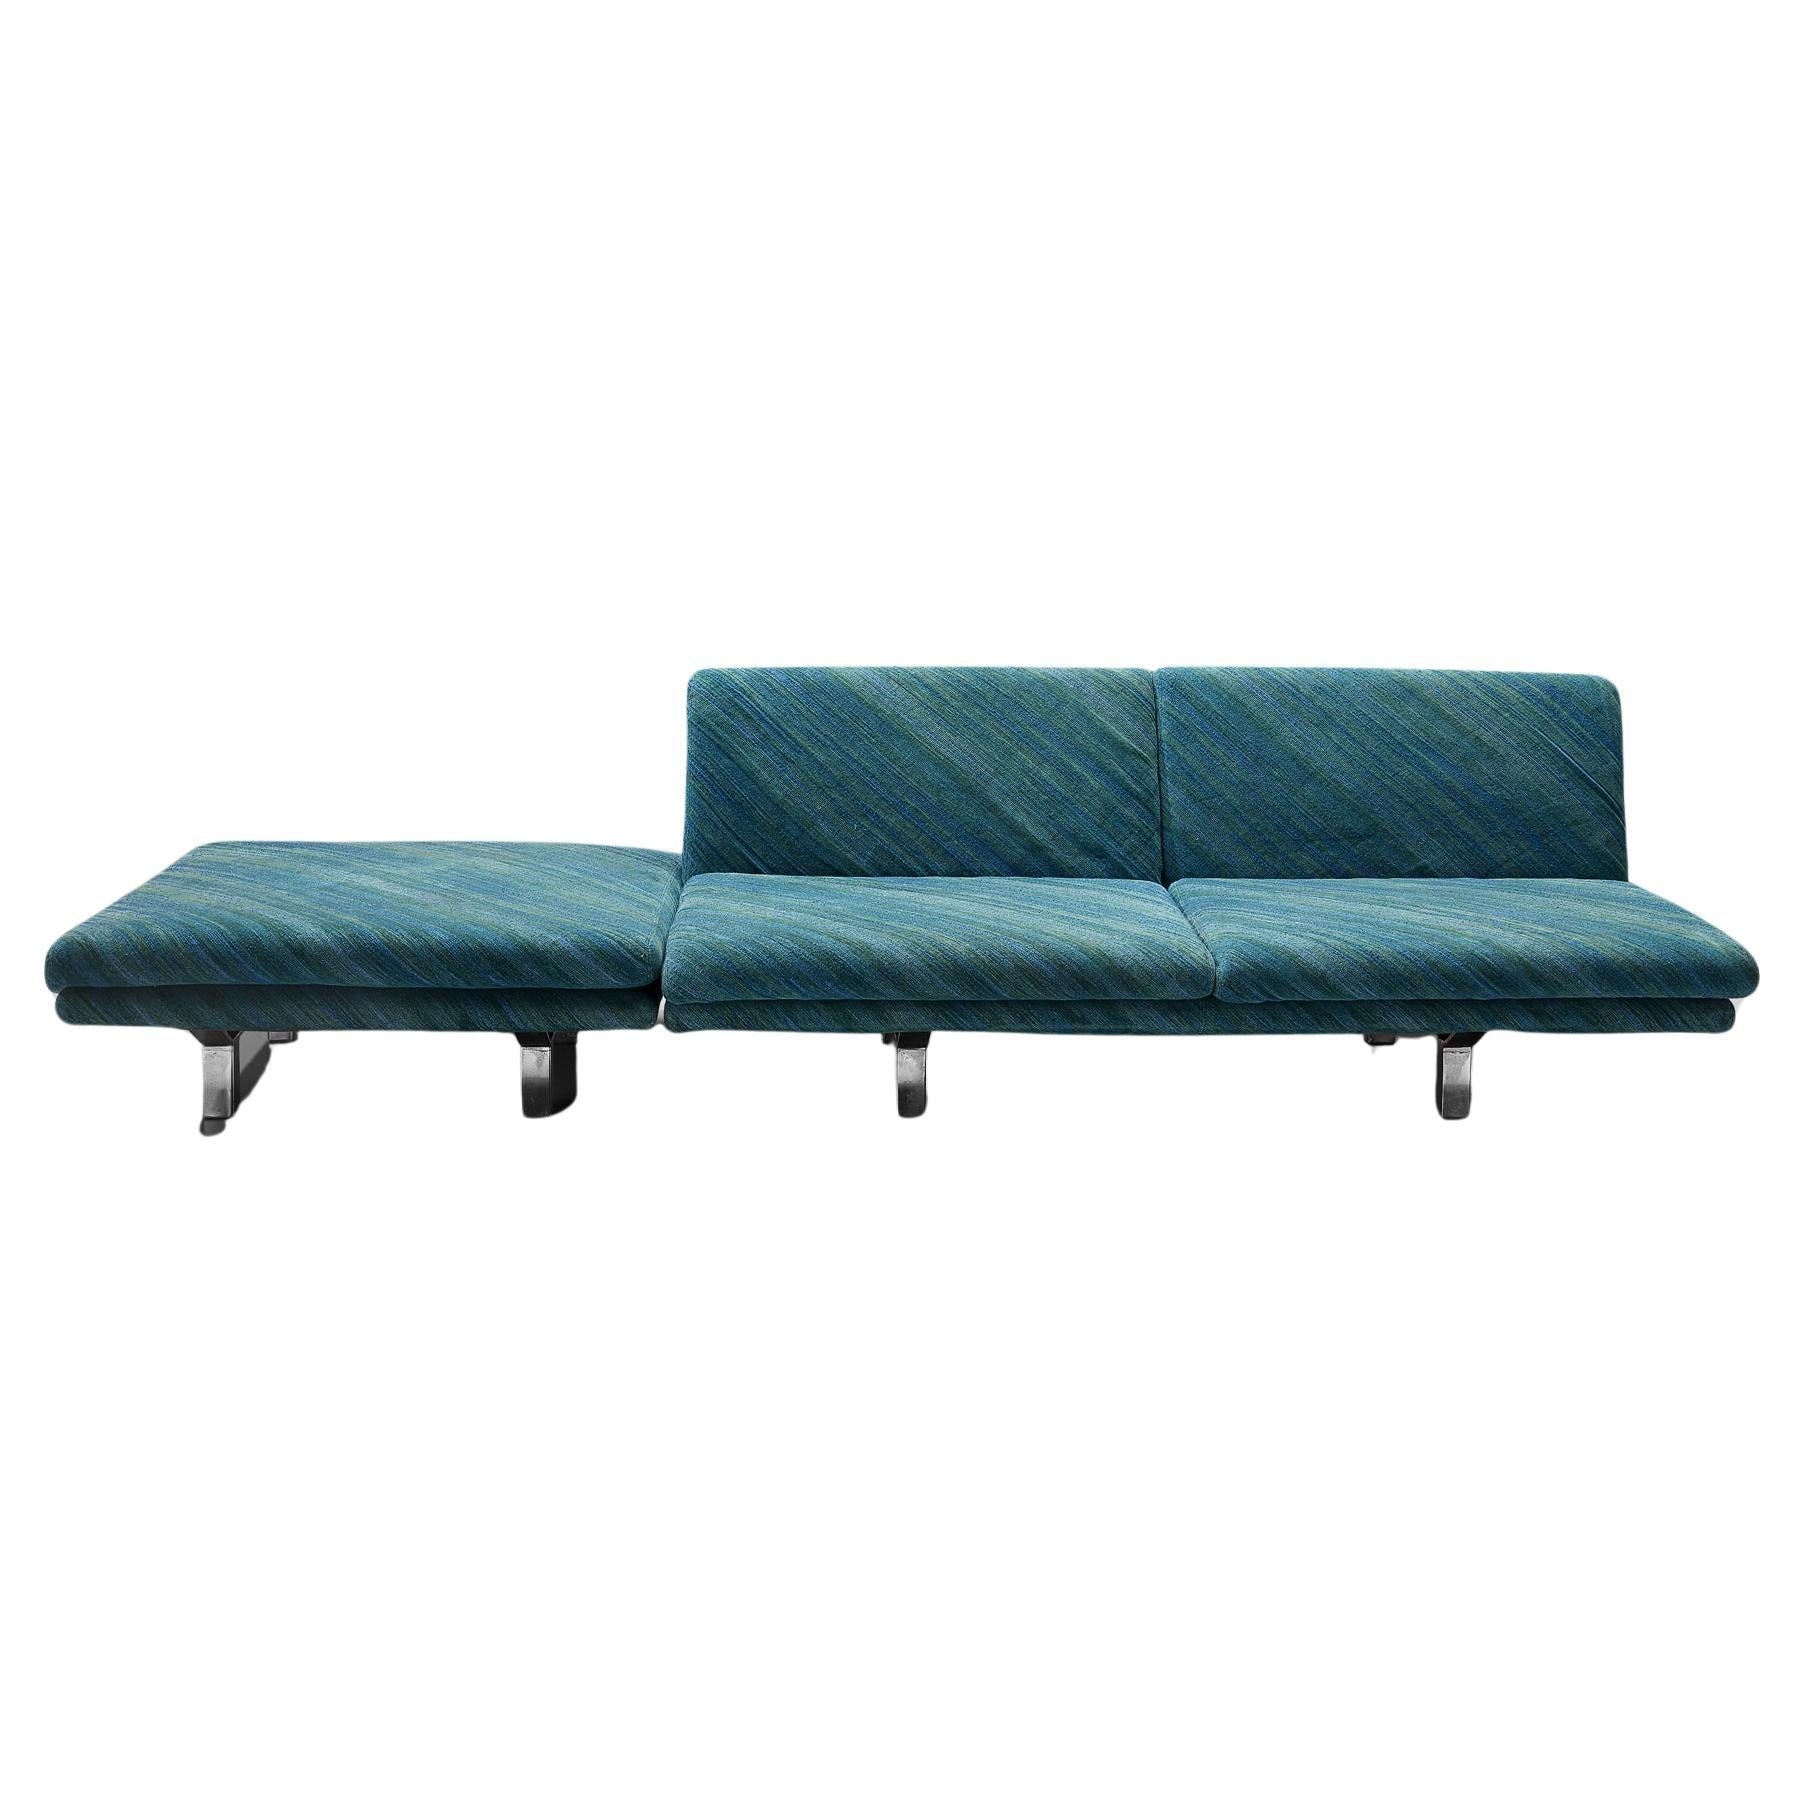 Saporiti, two seat sofa, ottoman, upholstered in green-blue textured fabric, metal legs, Italy, 1960s

Sofa with ottoman manufactured by Saporiti. This sofa is designed to be sleek, elegant and an eye-catcher. It has three seats without any